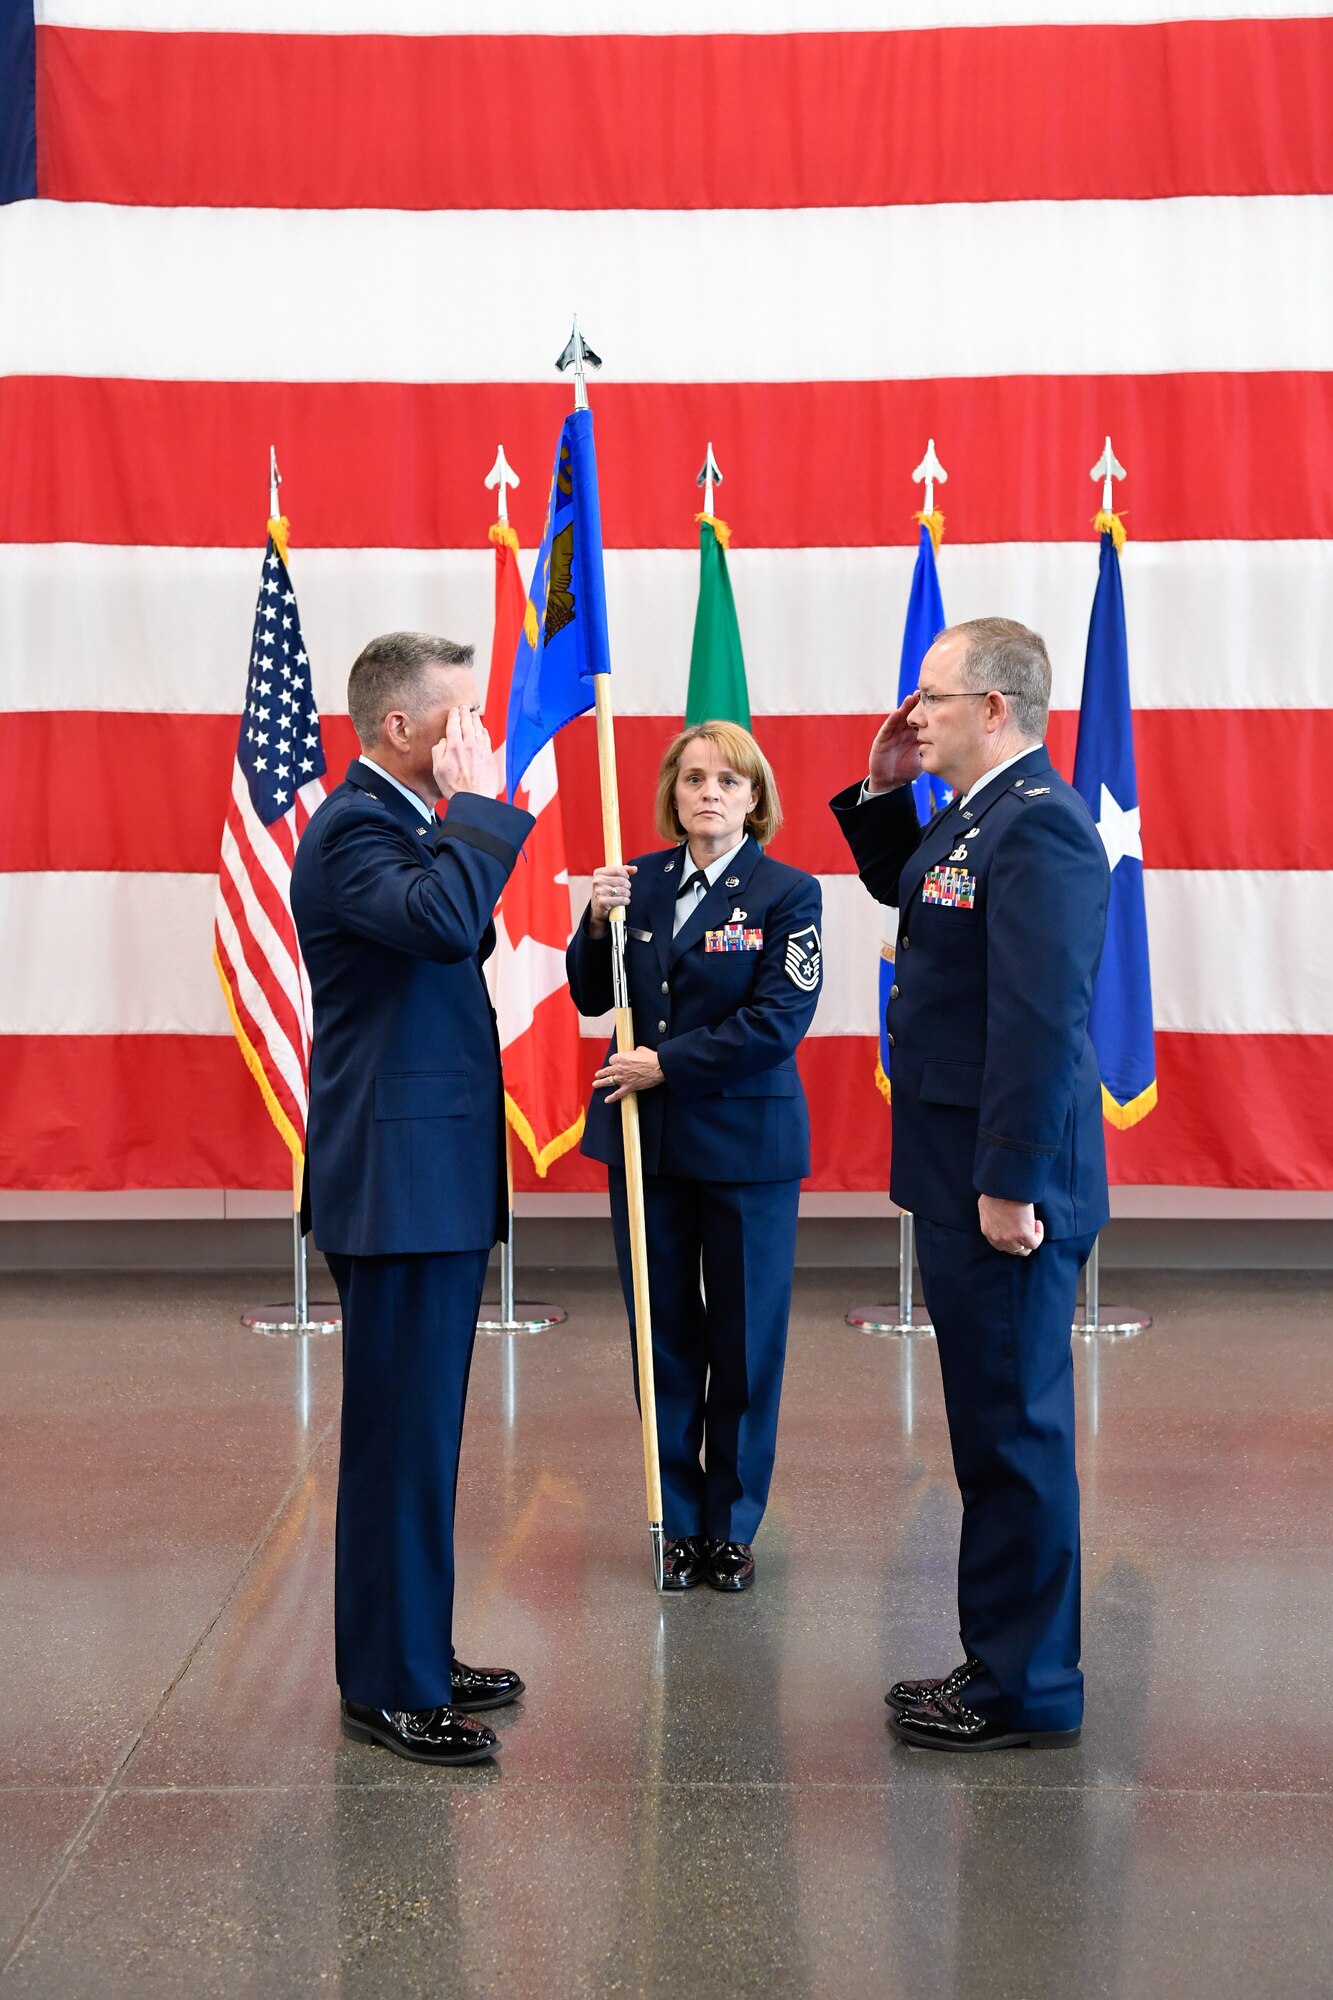 Brig. Gen. Jeremy Horn presides over the ceremony of Col. Scott Humphrey as he assumes command of the 225th Air Defense Group at the Pierce County Readiness Center, Camp Murray, Washington,  April 10, 2019. (U.S. Air National Guard photo by Capt. Colette Muller)